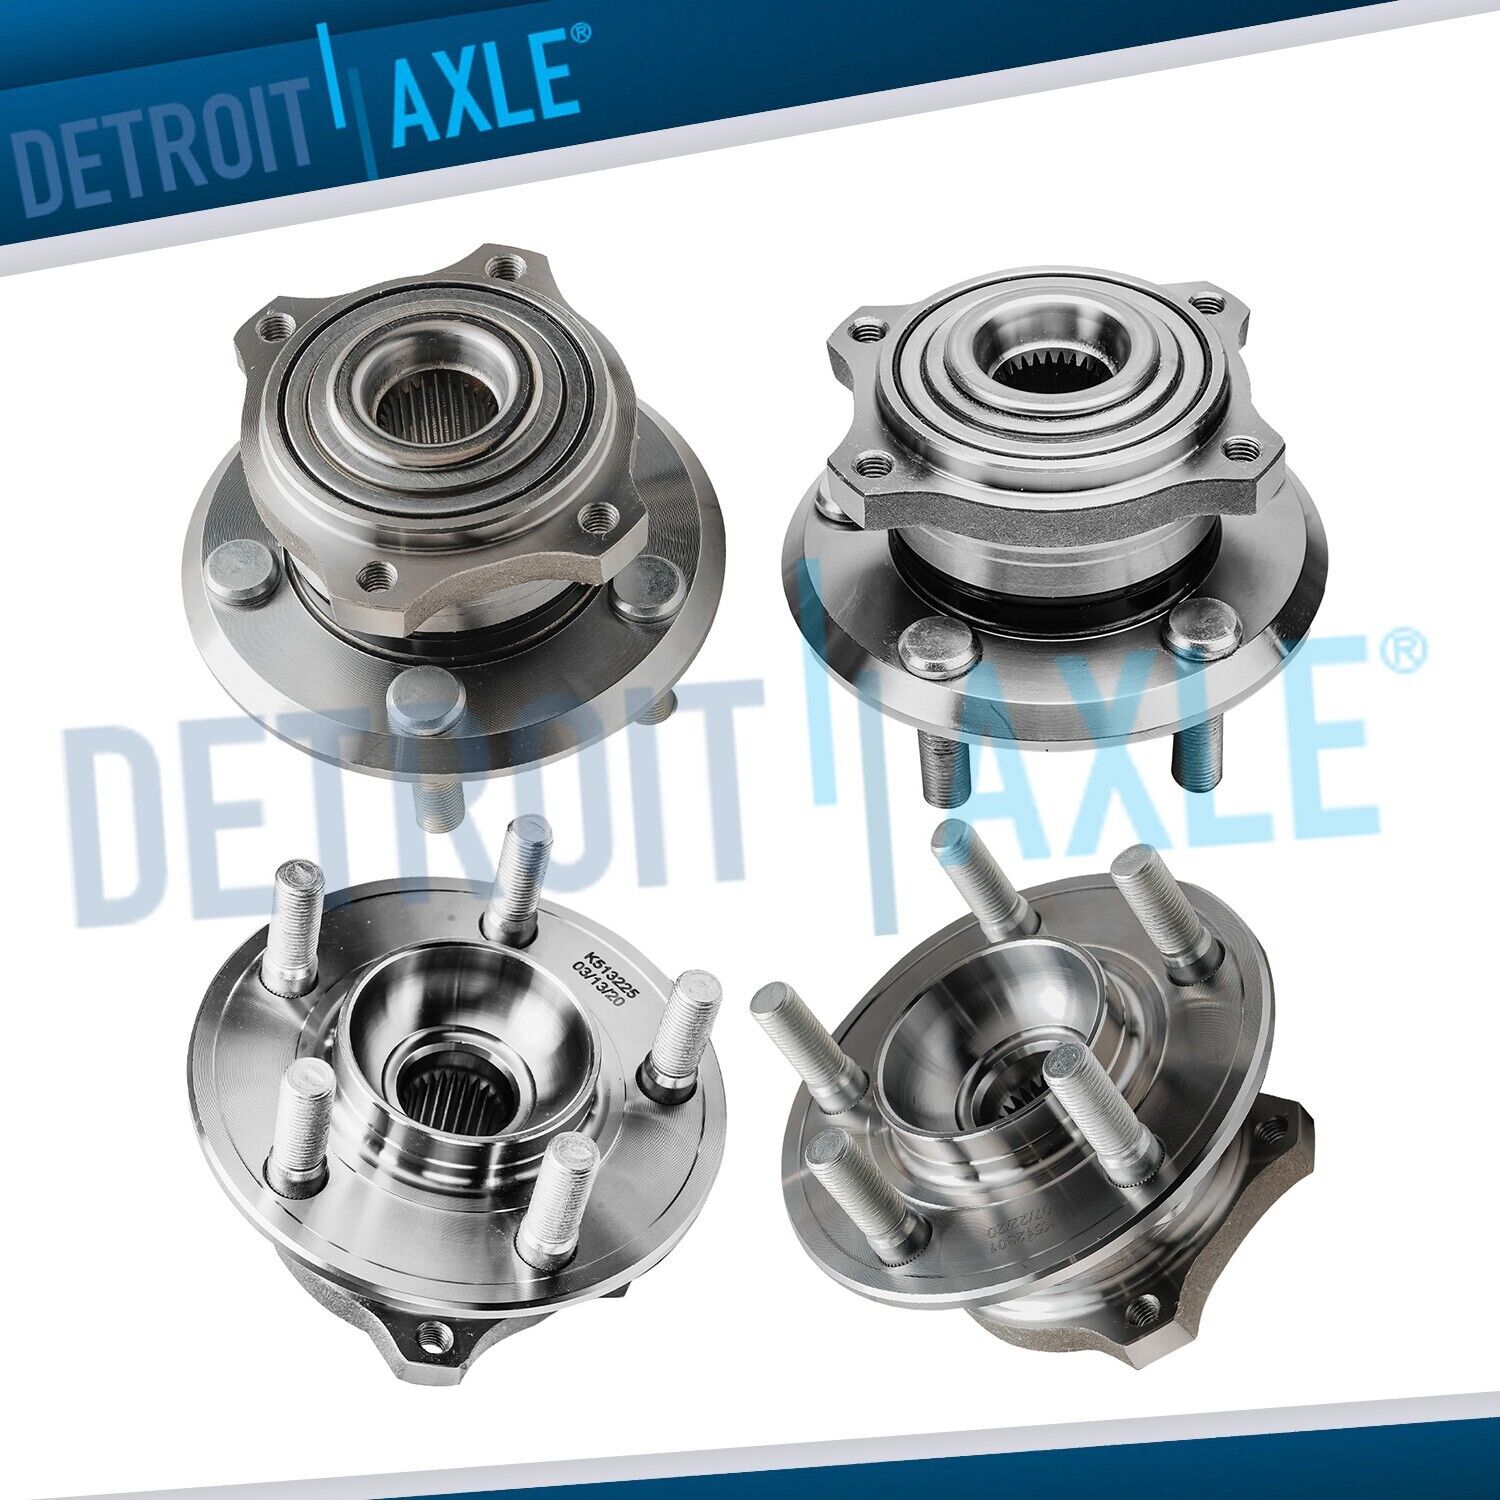 4pc AWD Front Rear Wheel Bearing & Hubs for Chrysler 300 Dodge Charger Magnum